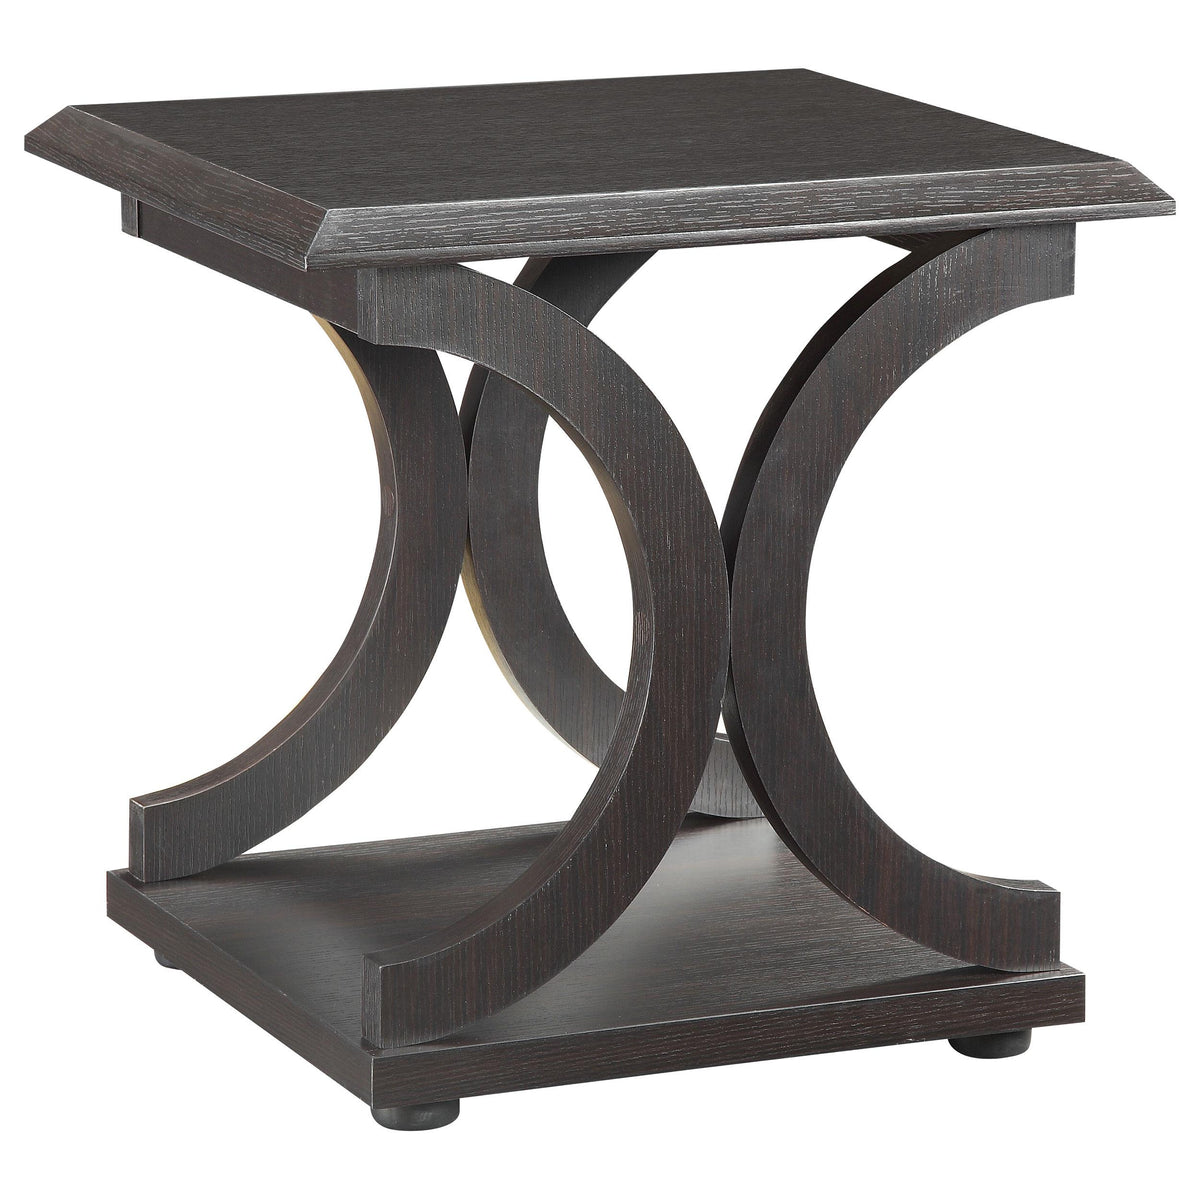 Shelly C-shaped Base End Table Cappuccino Shelly C-shaped Base End Table Cappuccino Half Price Furniture